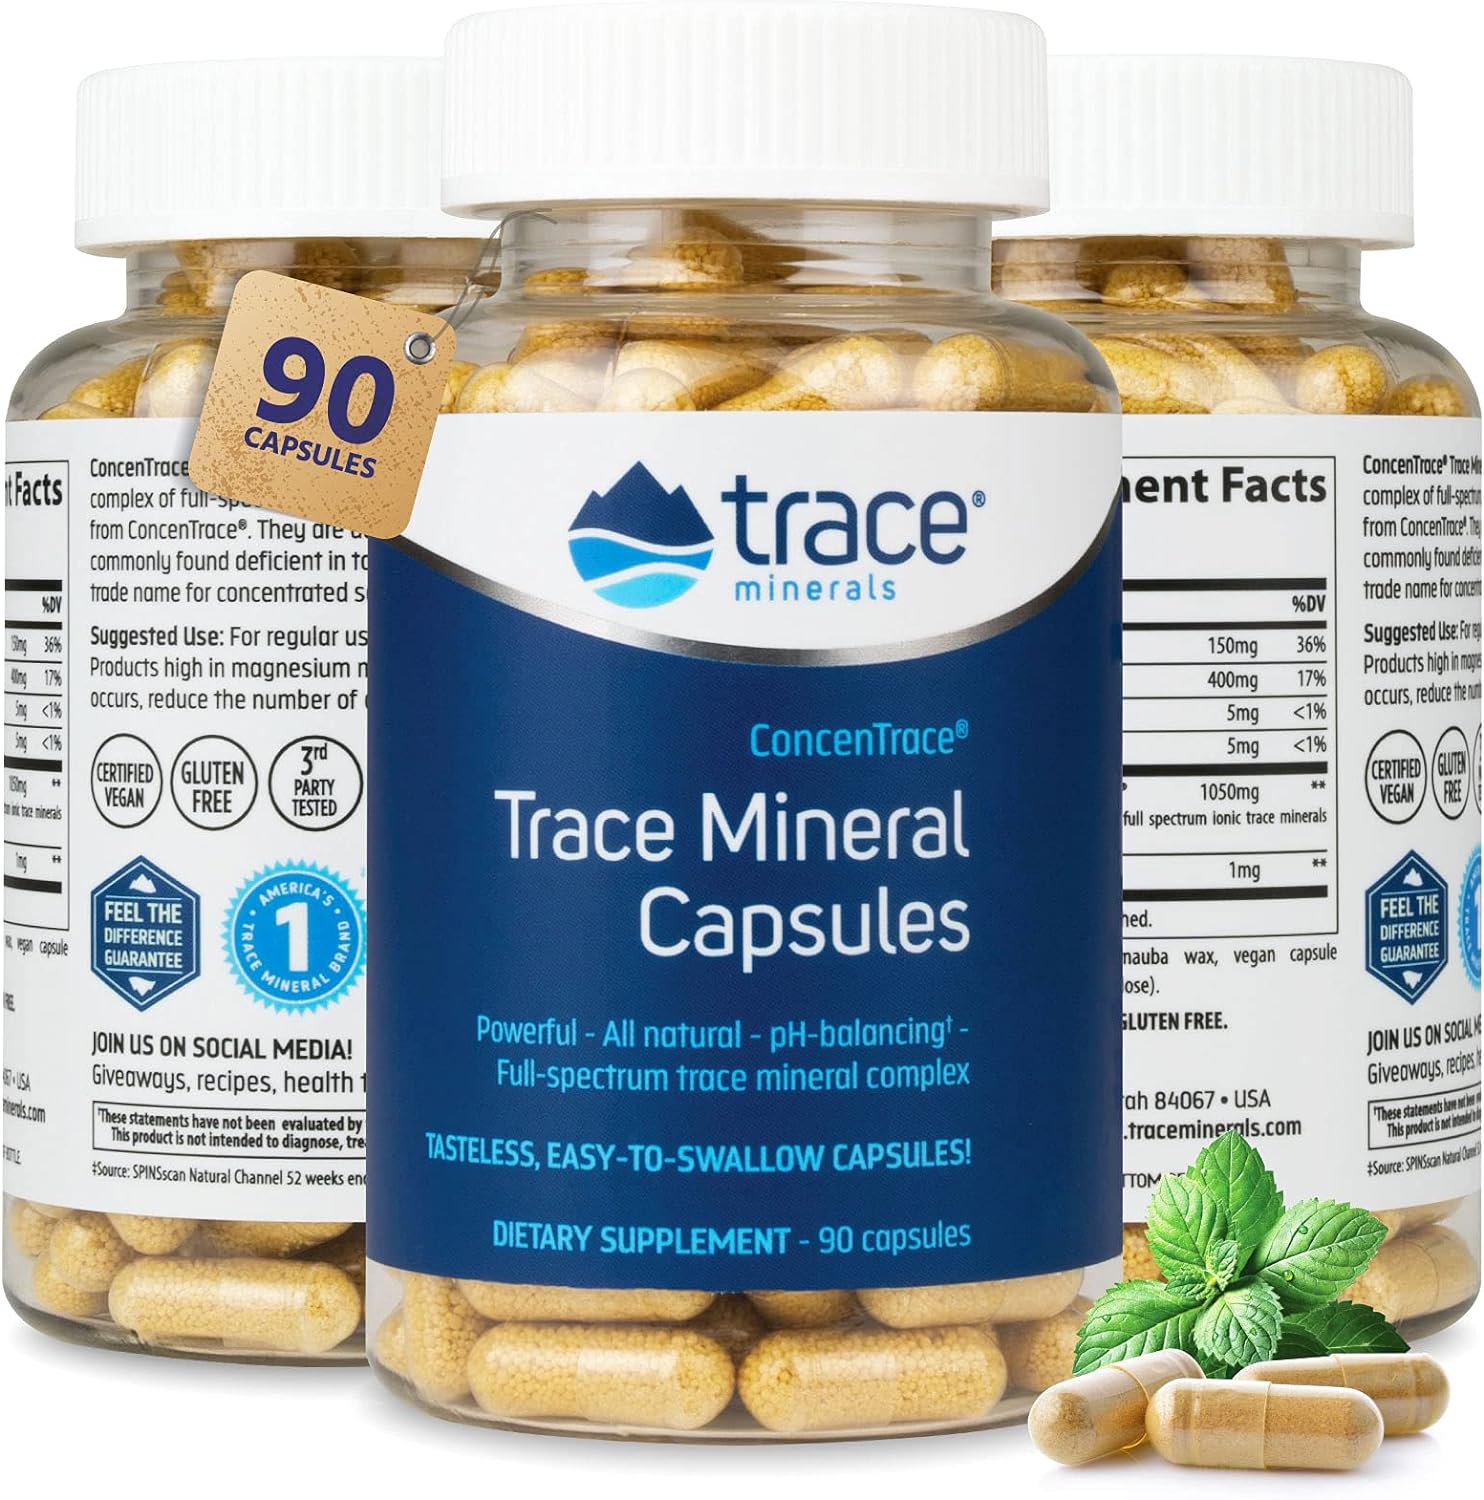 Trace Minerals | ConcenTrace Capsules |Daily Magnesium and Potassium Supplement | Certified Vegan, Non-GMO, Gluten-free-------------260